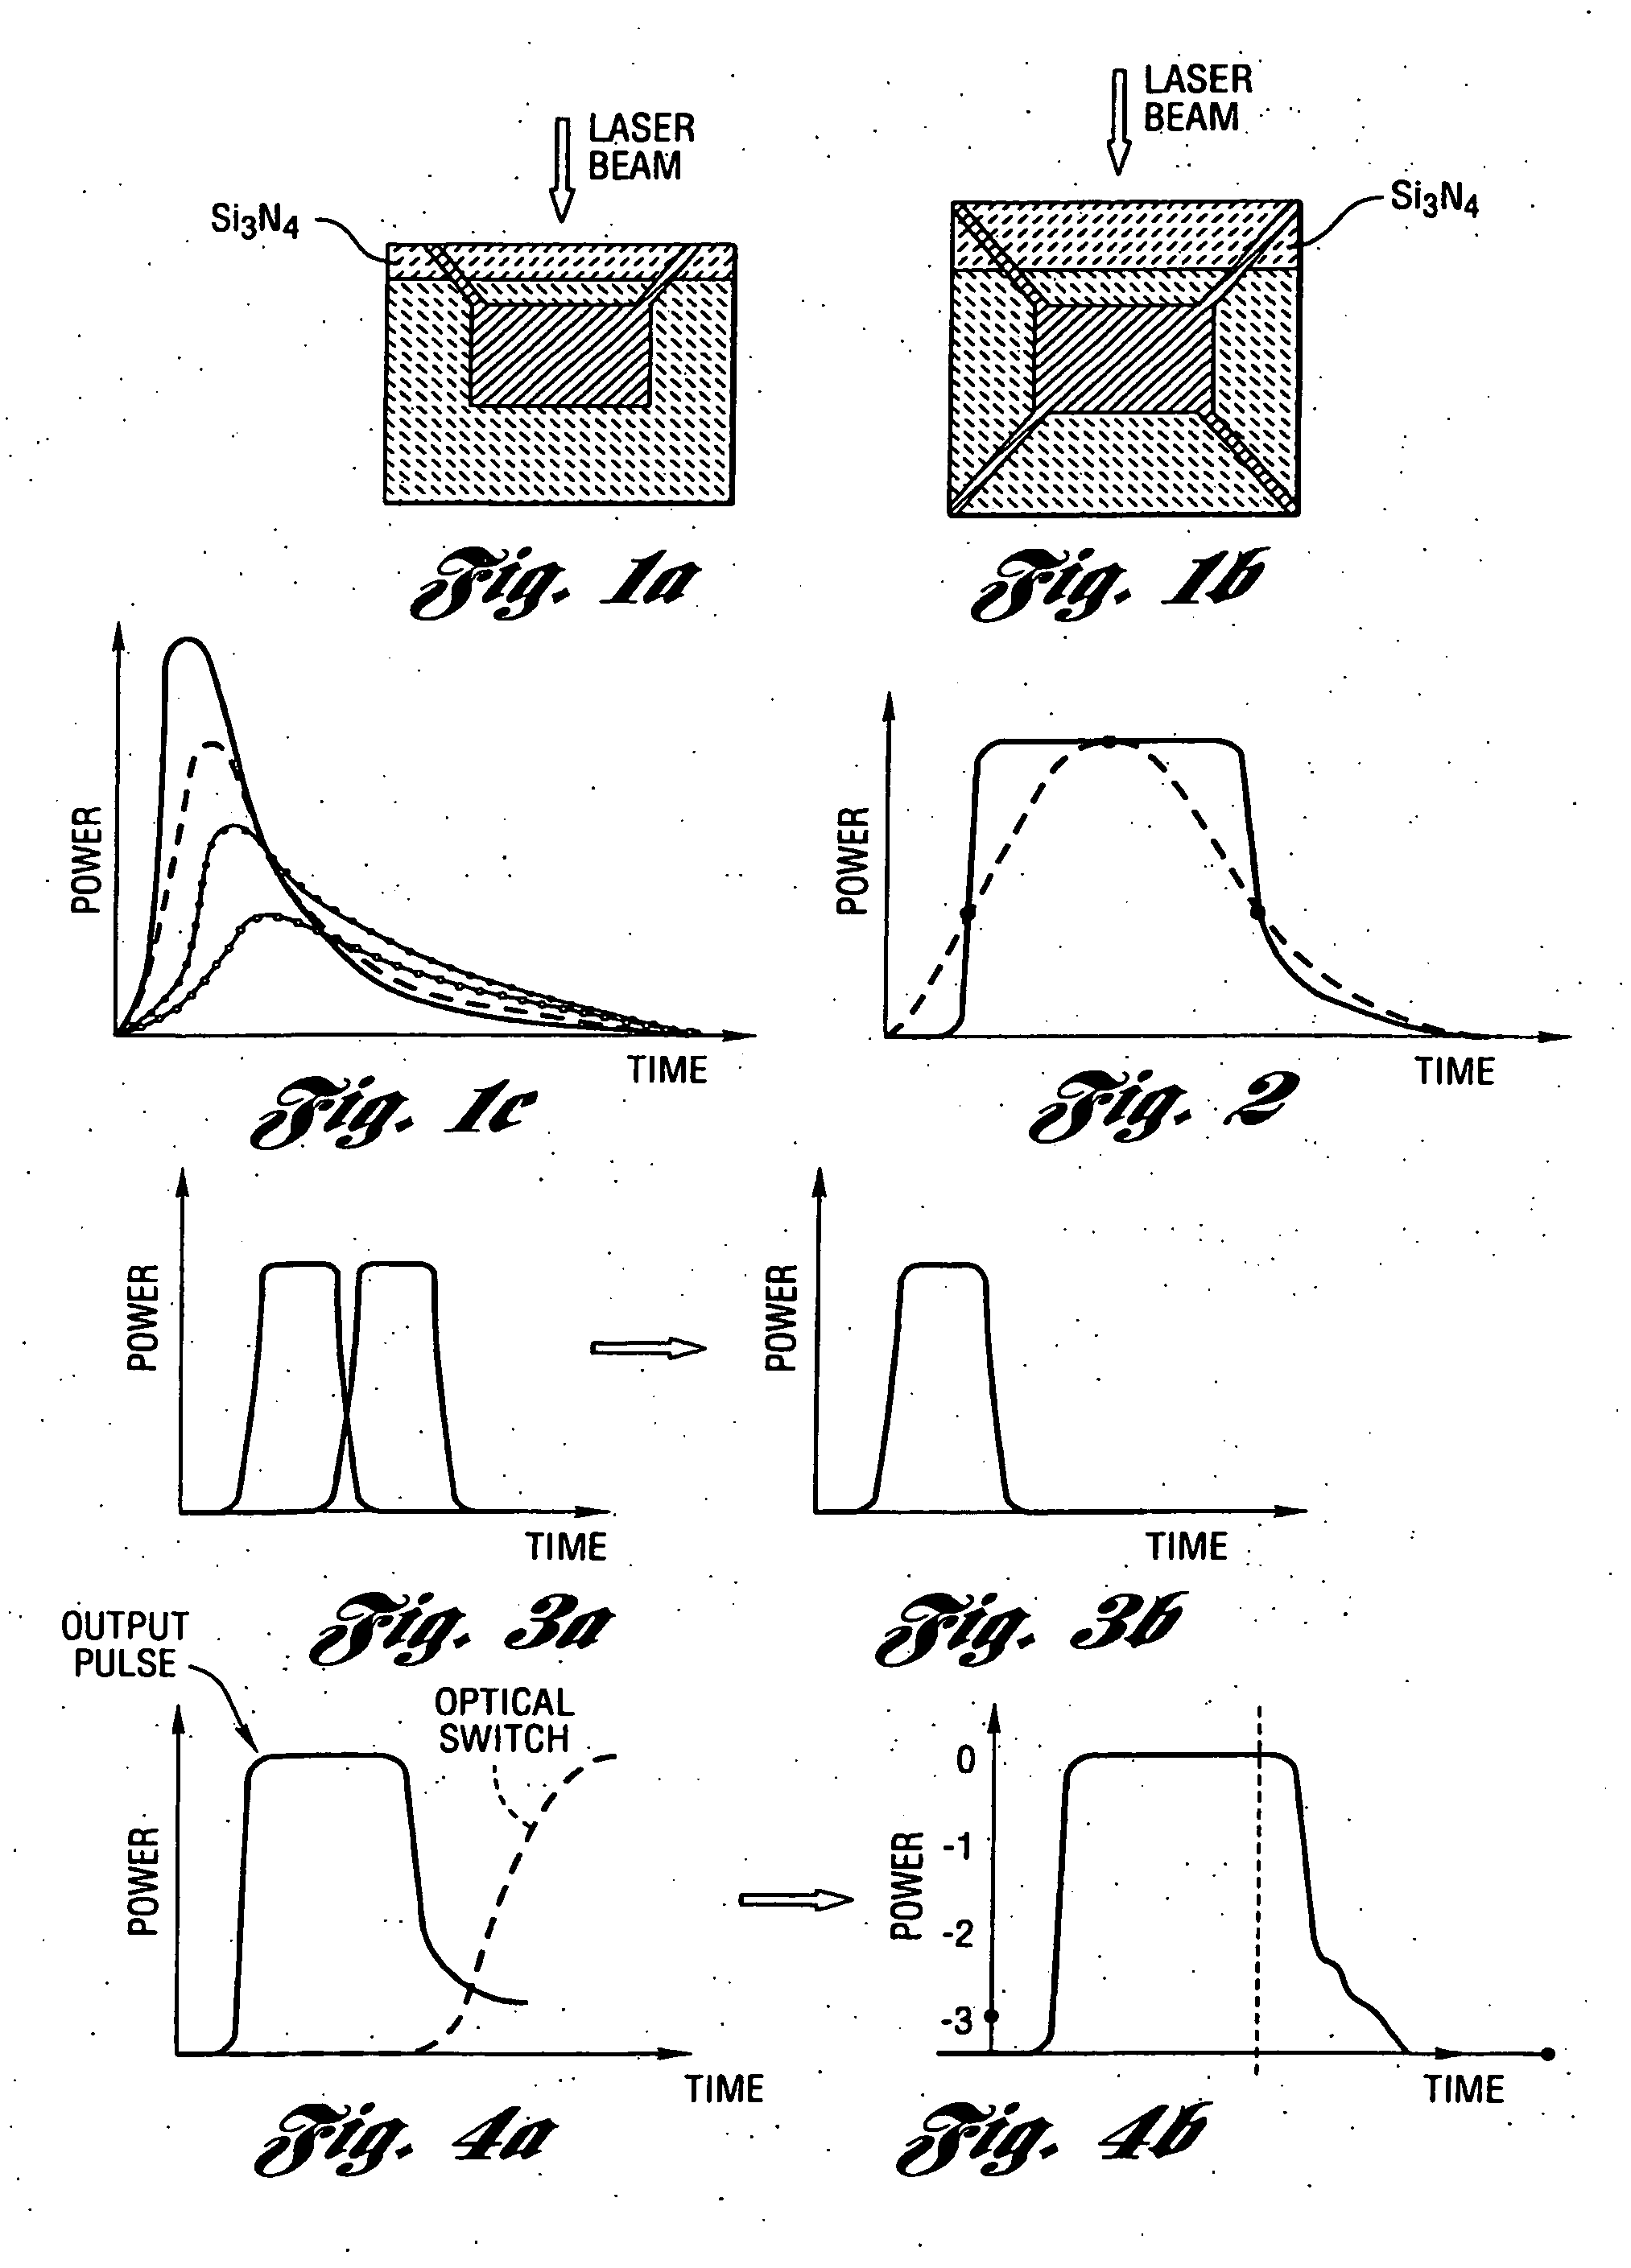 Energy-efficient, laser-based method and system for processing target material